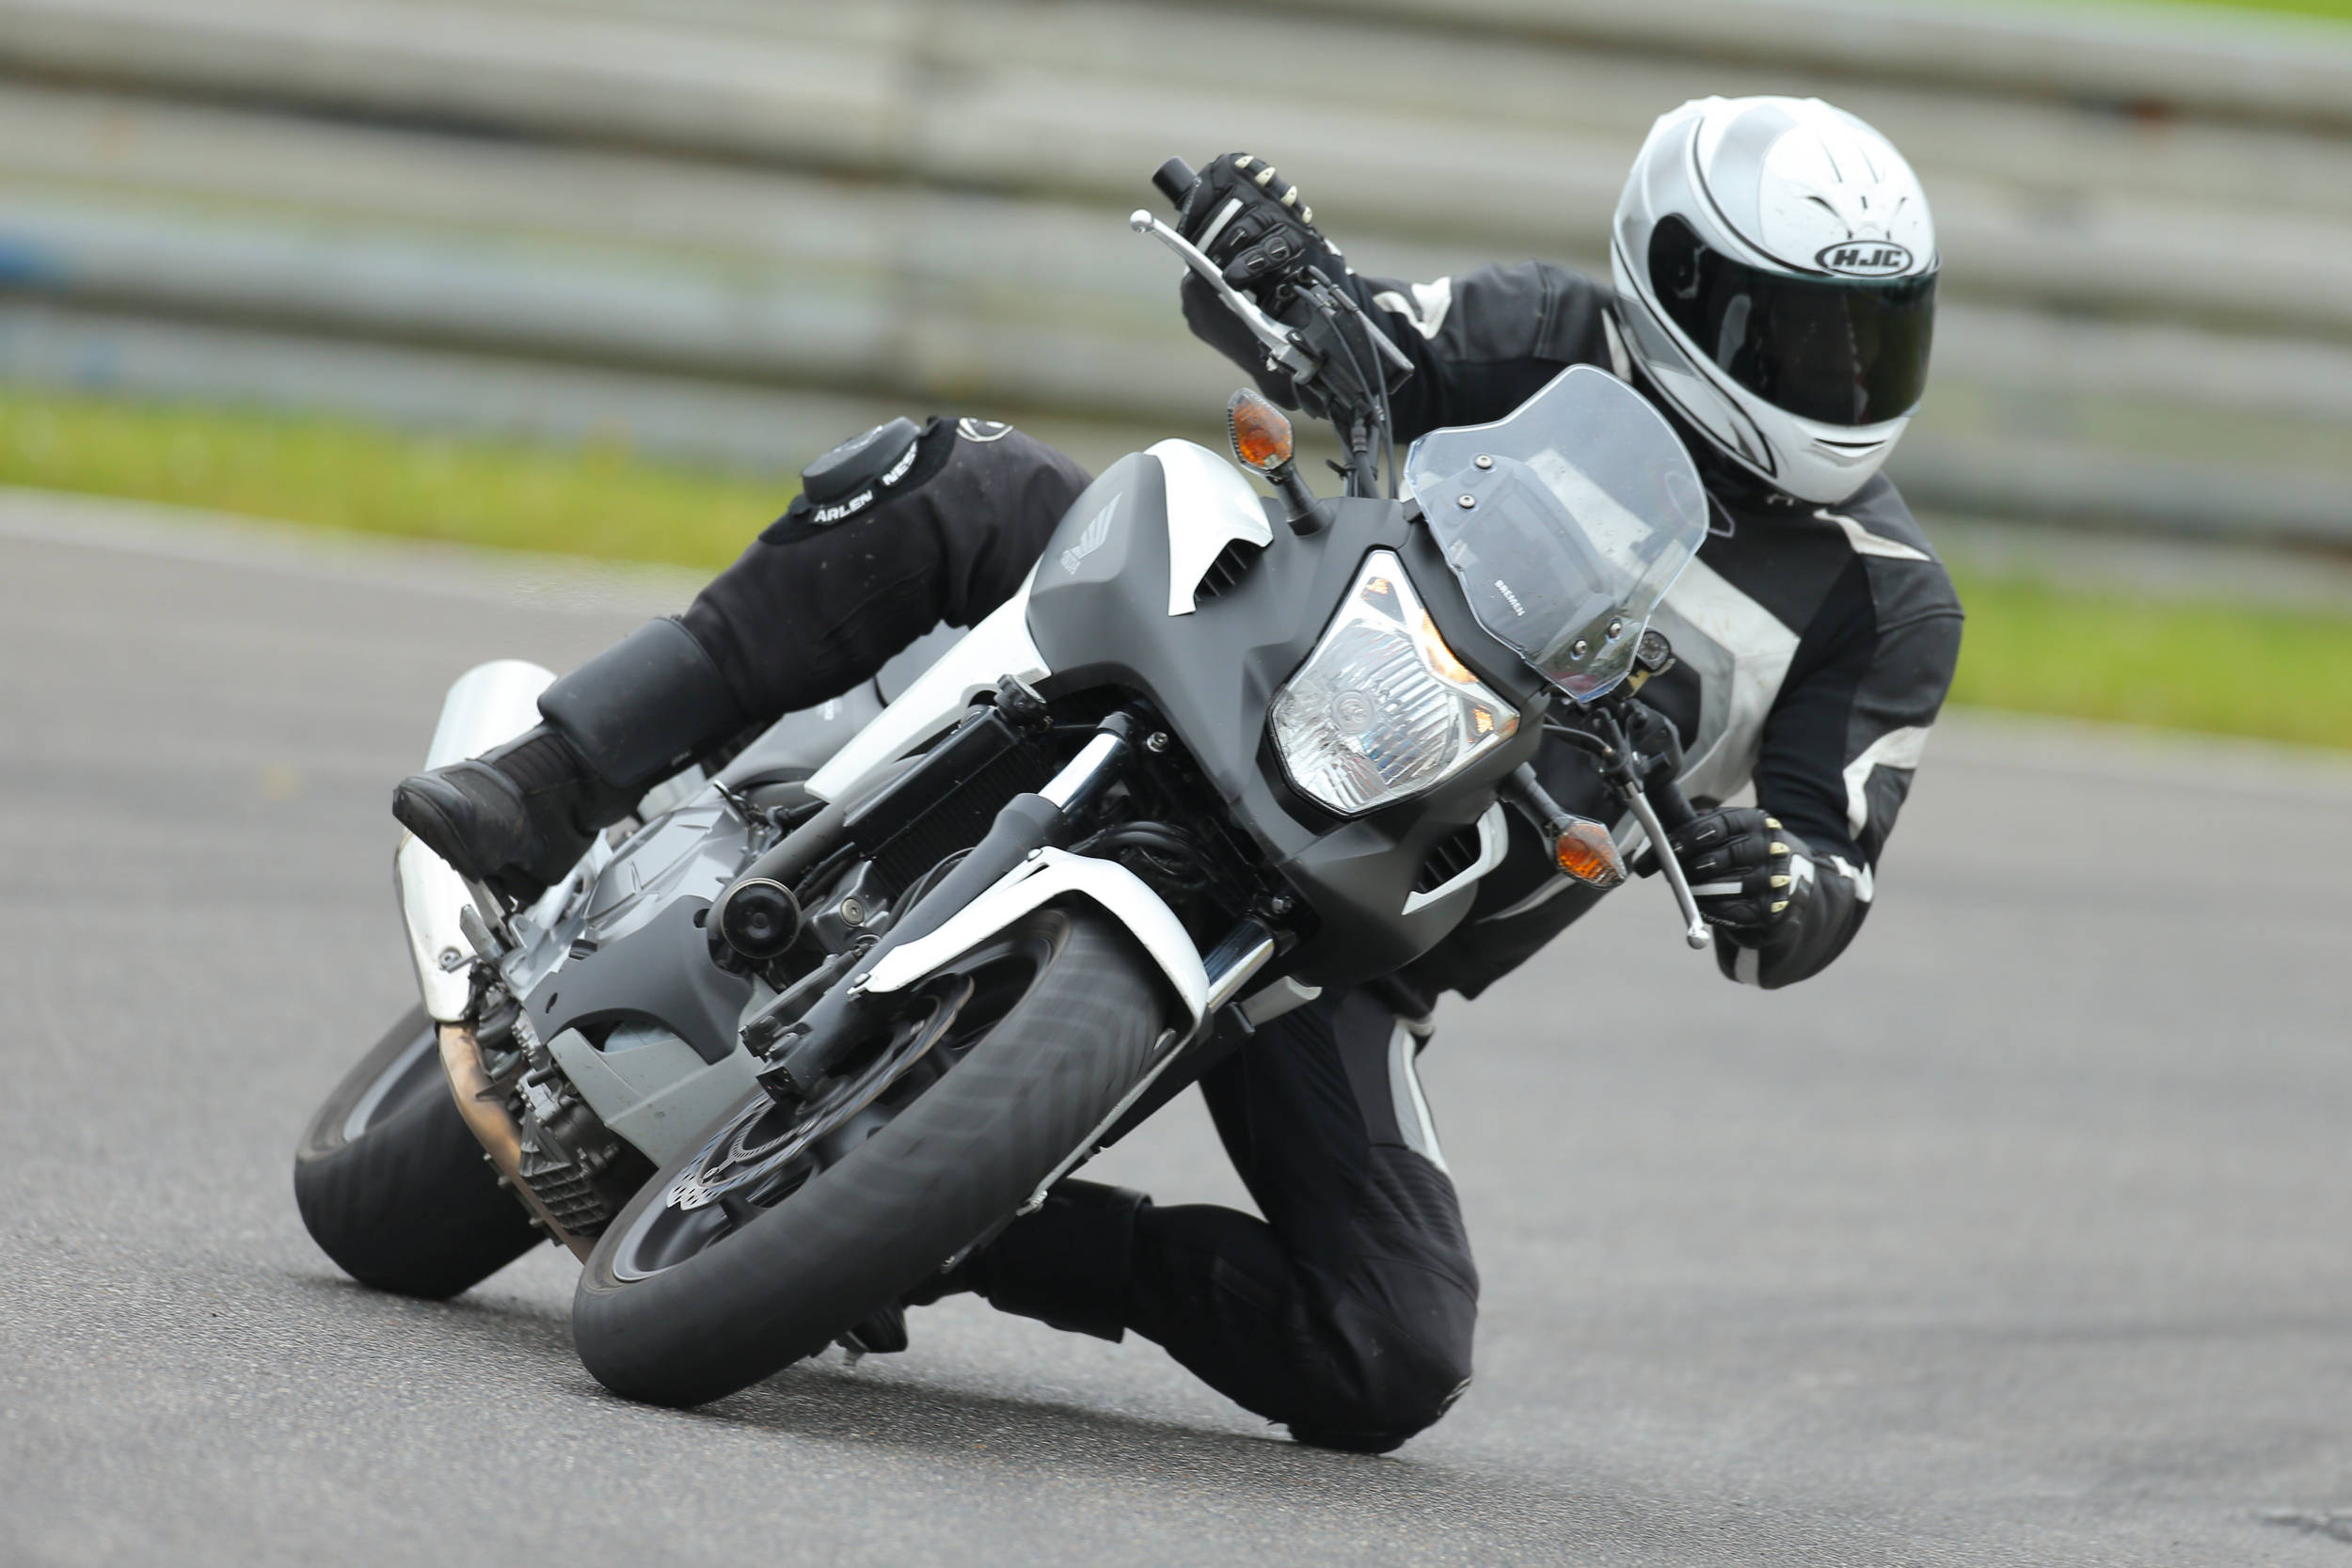 NC700X on the Racetrack